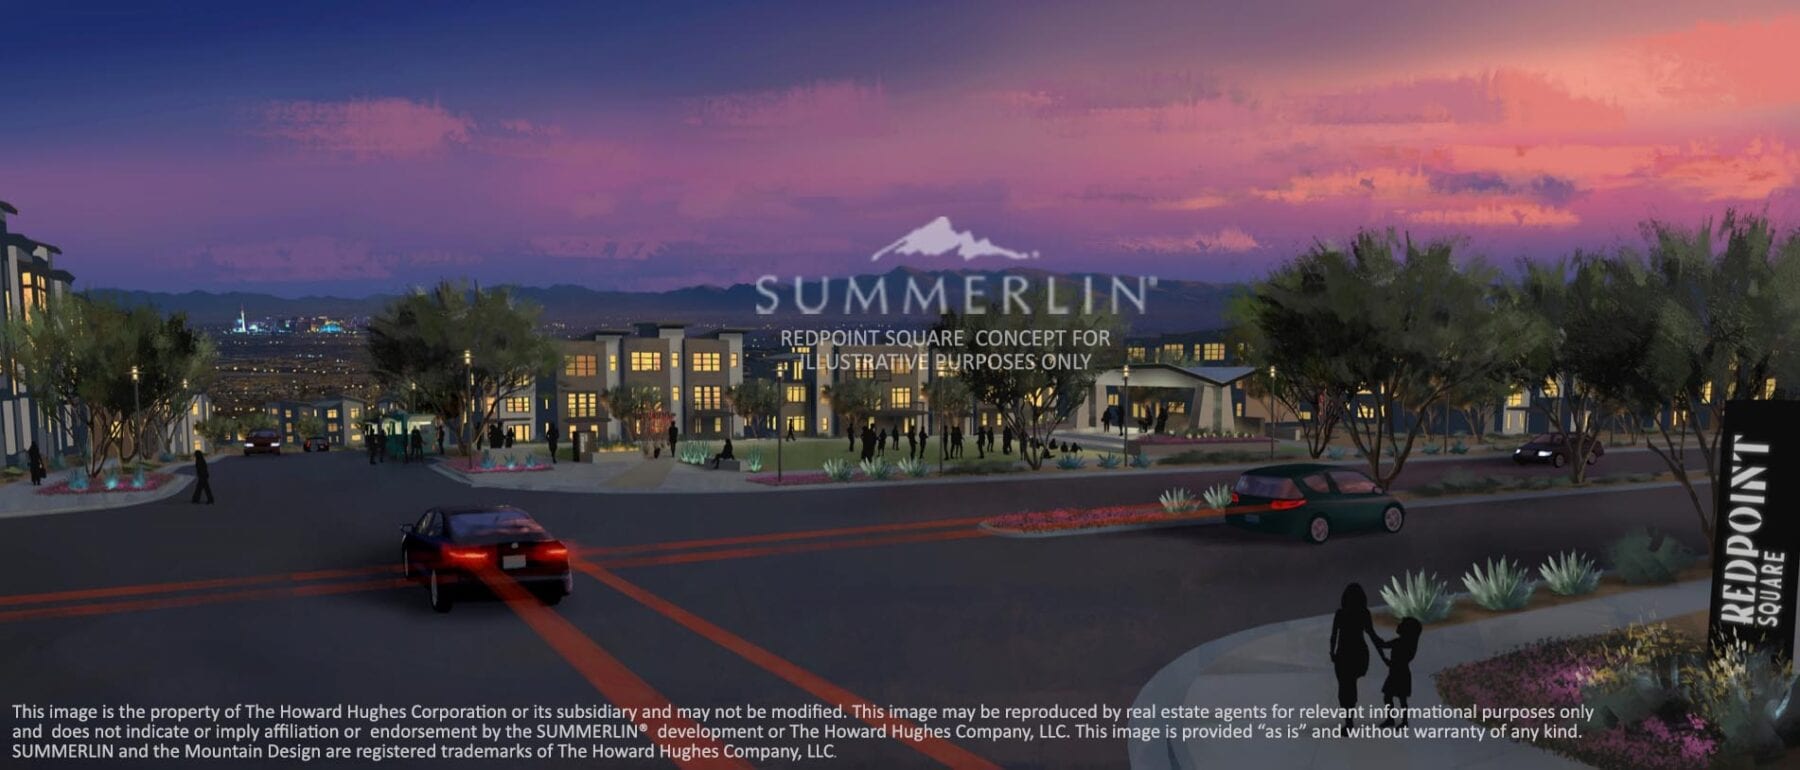 Redpoint Square in Summerlin West Illustrative Conceptual Rendering - Credit: The Howard Hughes Corporation